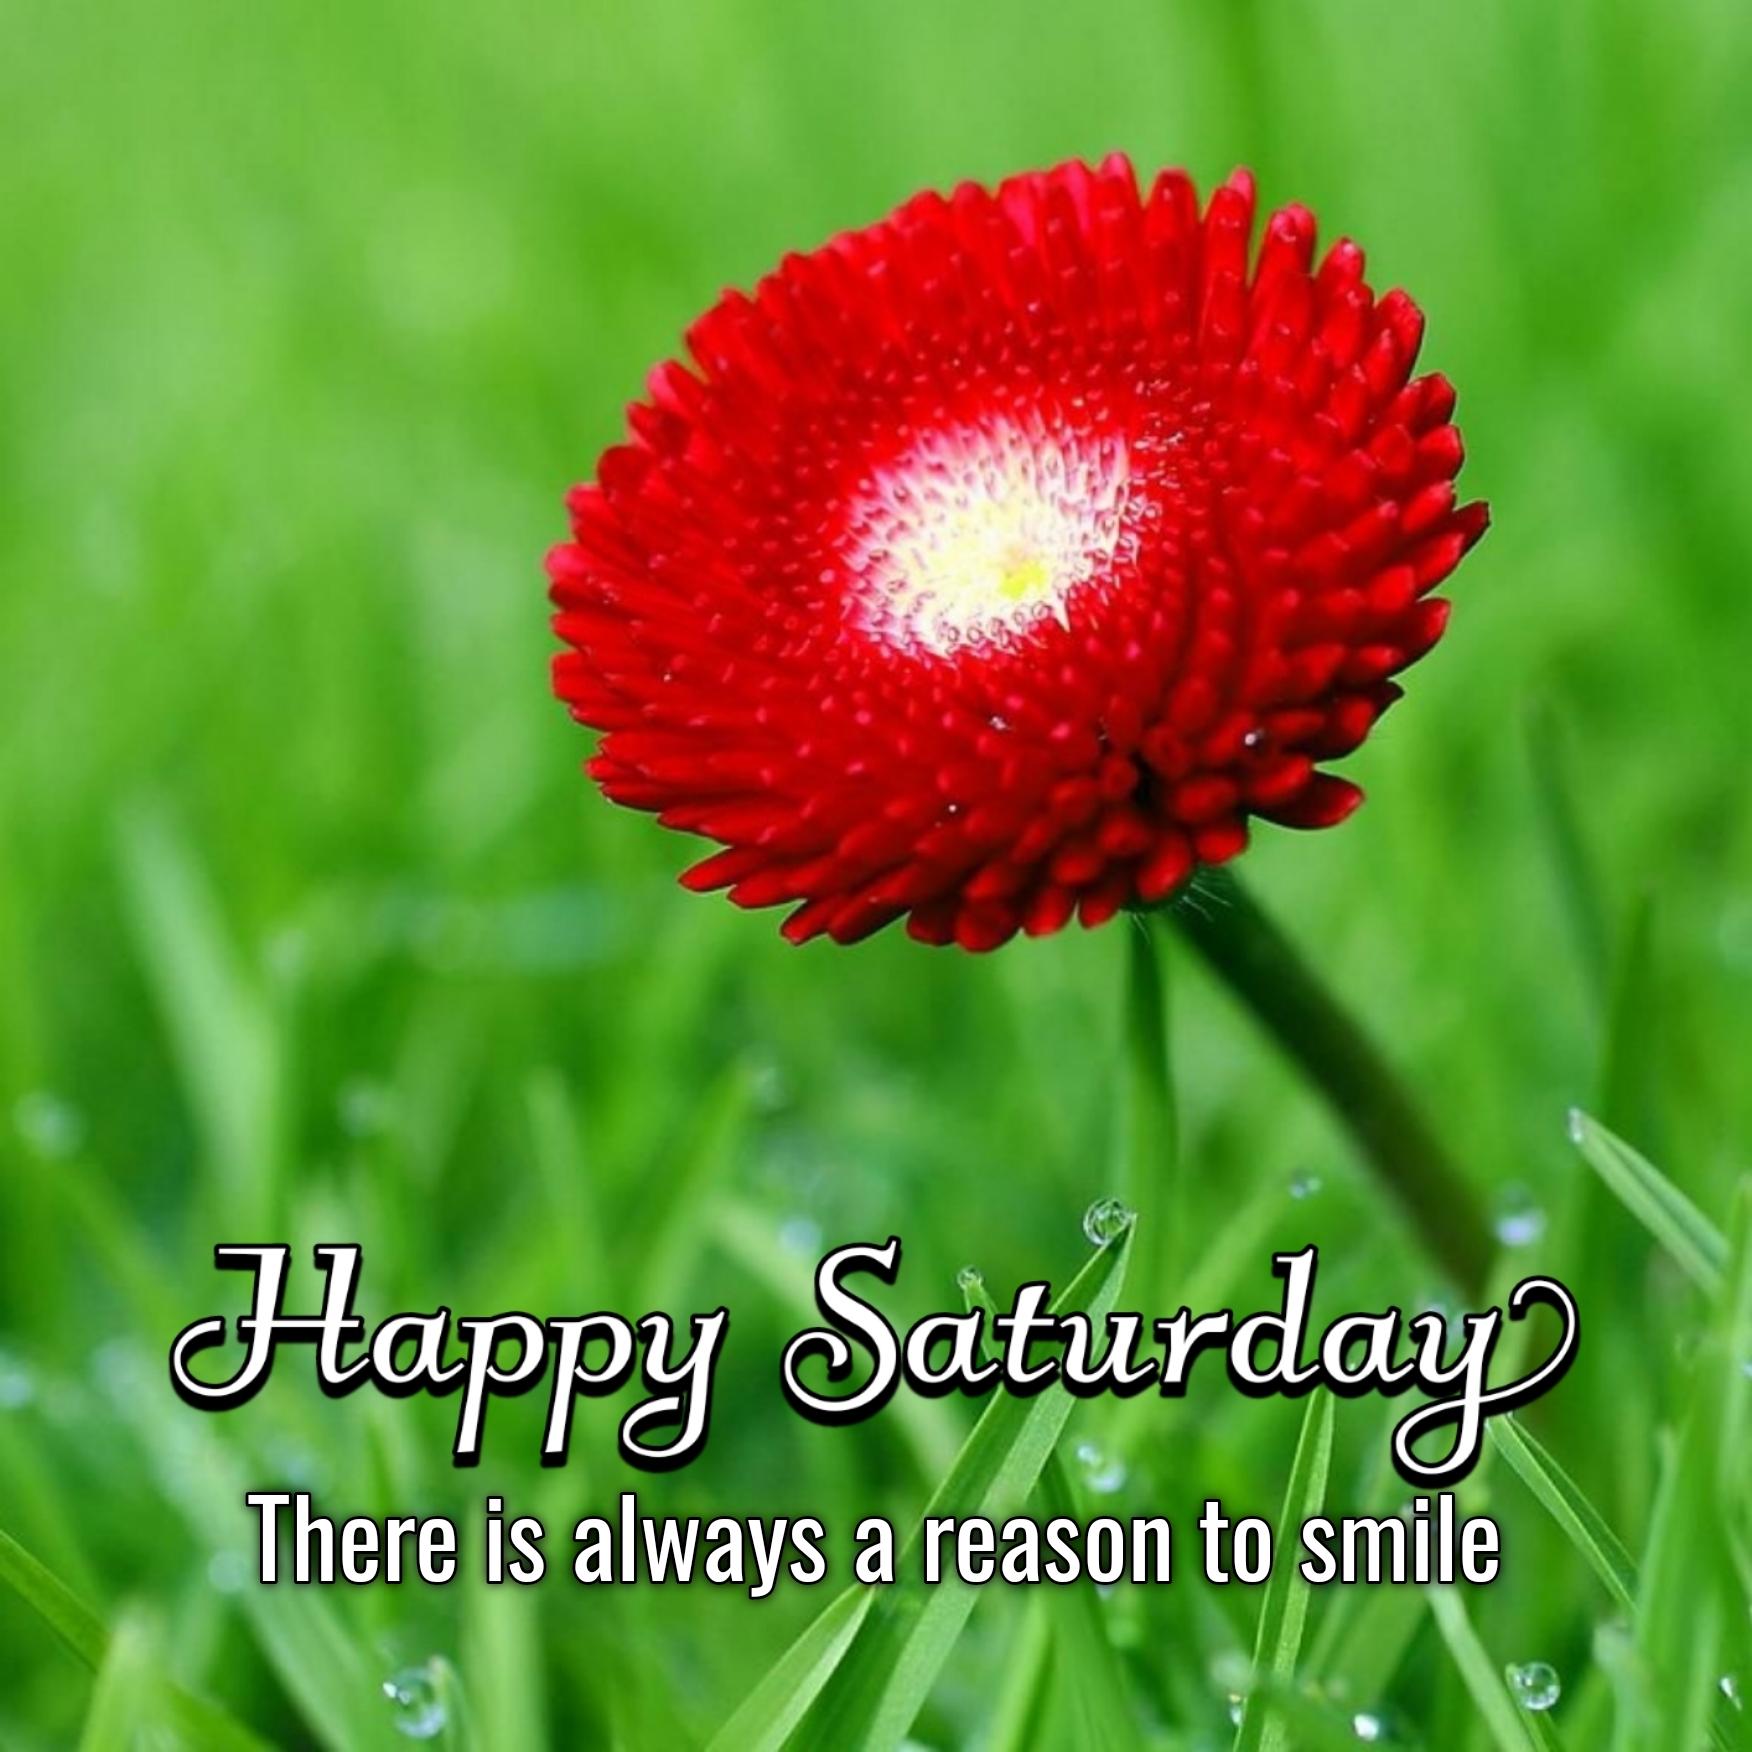 Happy Saturday There Is Always A Reason To Smile Images